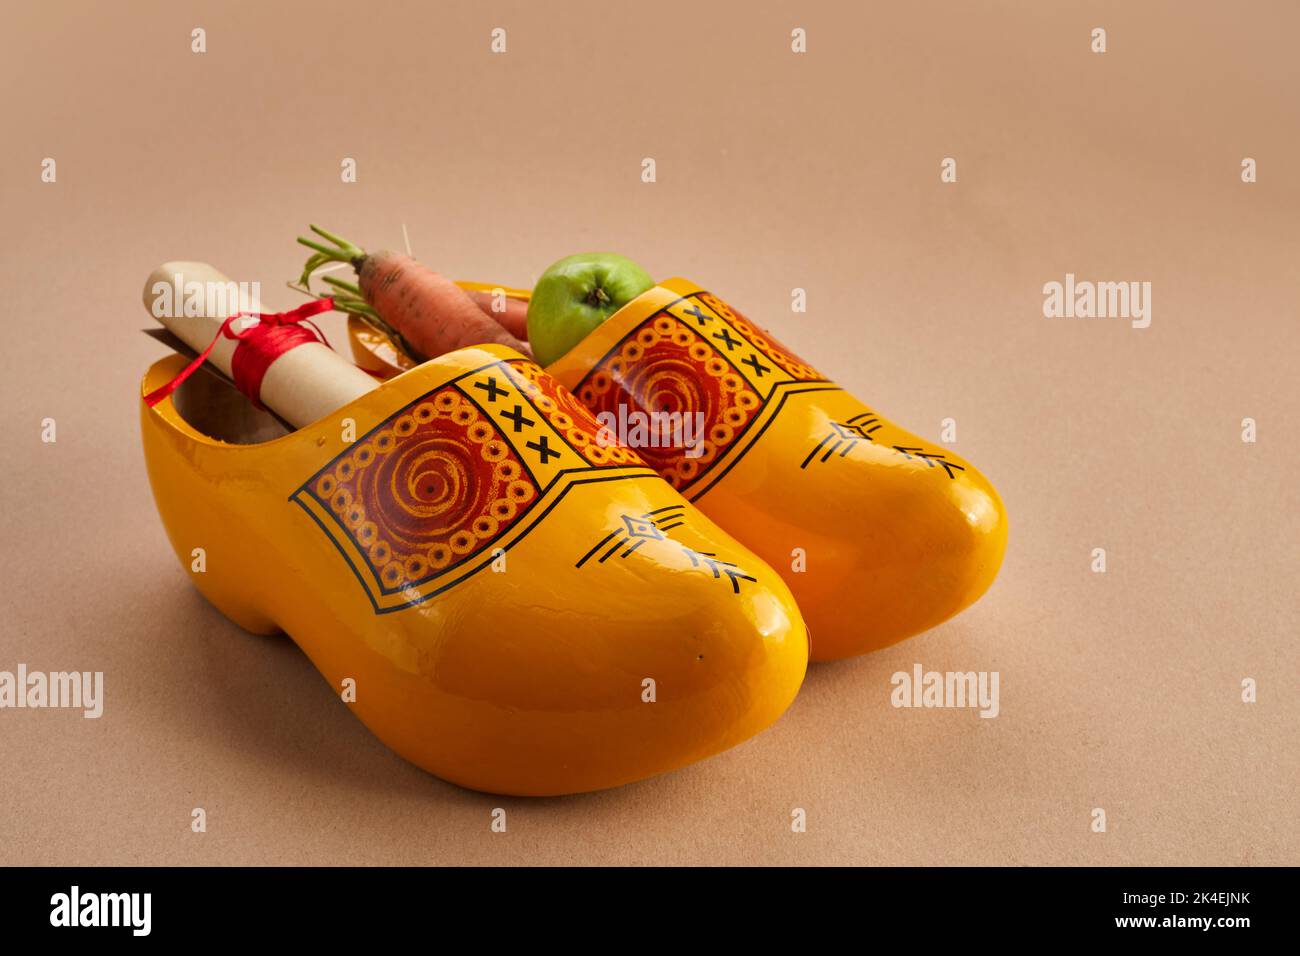 Saint Nicholas - Sinterklaas day with shoe, carrot and apples on caramel background Stock Photo